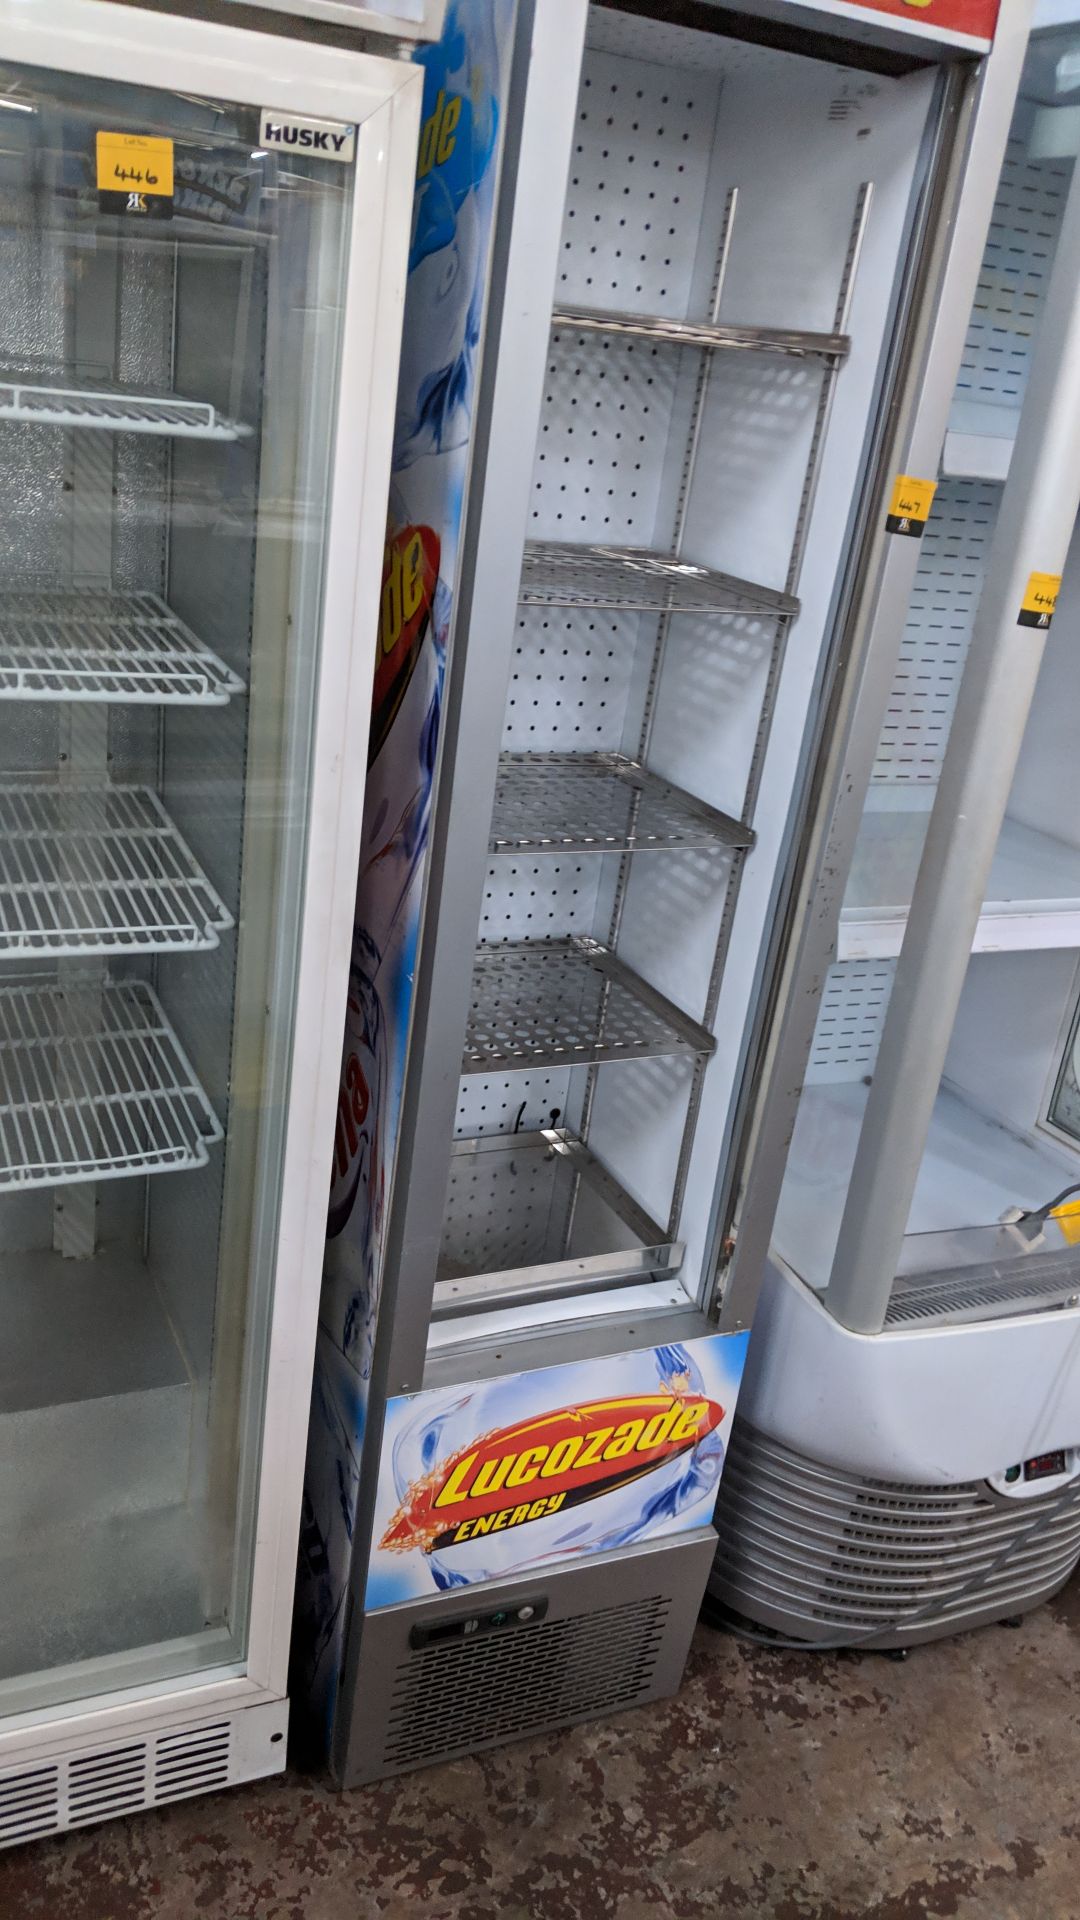 Slimline open front display fridge IMPORTANT: Please remember goods successfully bid upon must be - Image 3 of 3